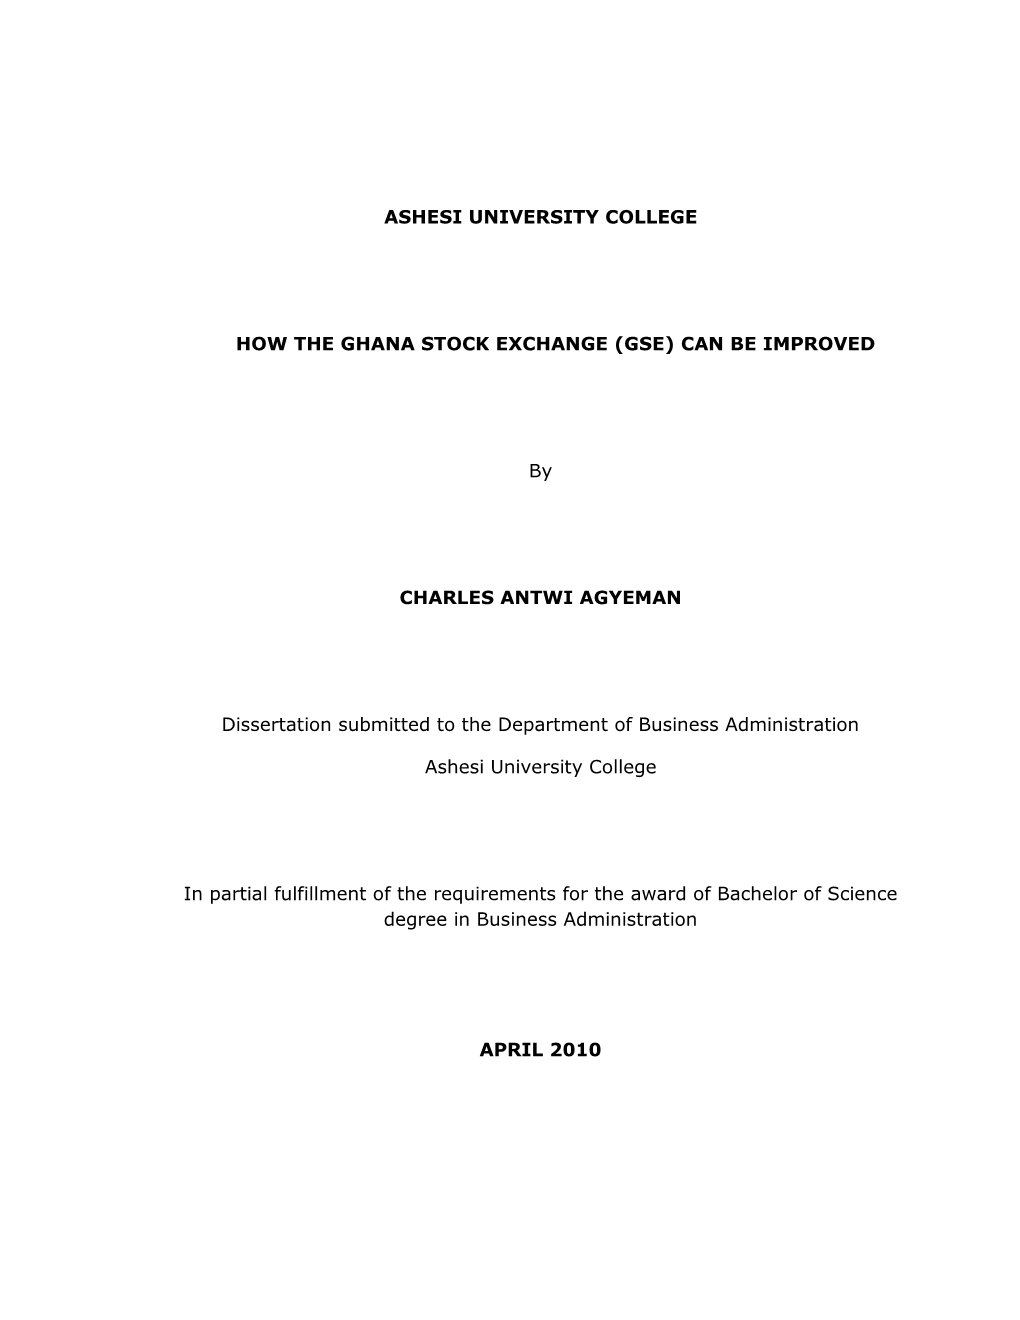 ASHESI UNIVERSITY COLLEGE HOW the GHANA STOCK EXCHANGE (GSE) CAN BE IMPROVED by CHARLES ANTWI AGYEMAN Dissertation Submitted To